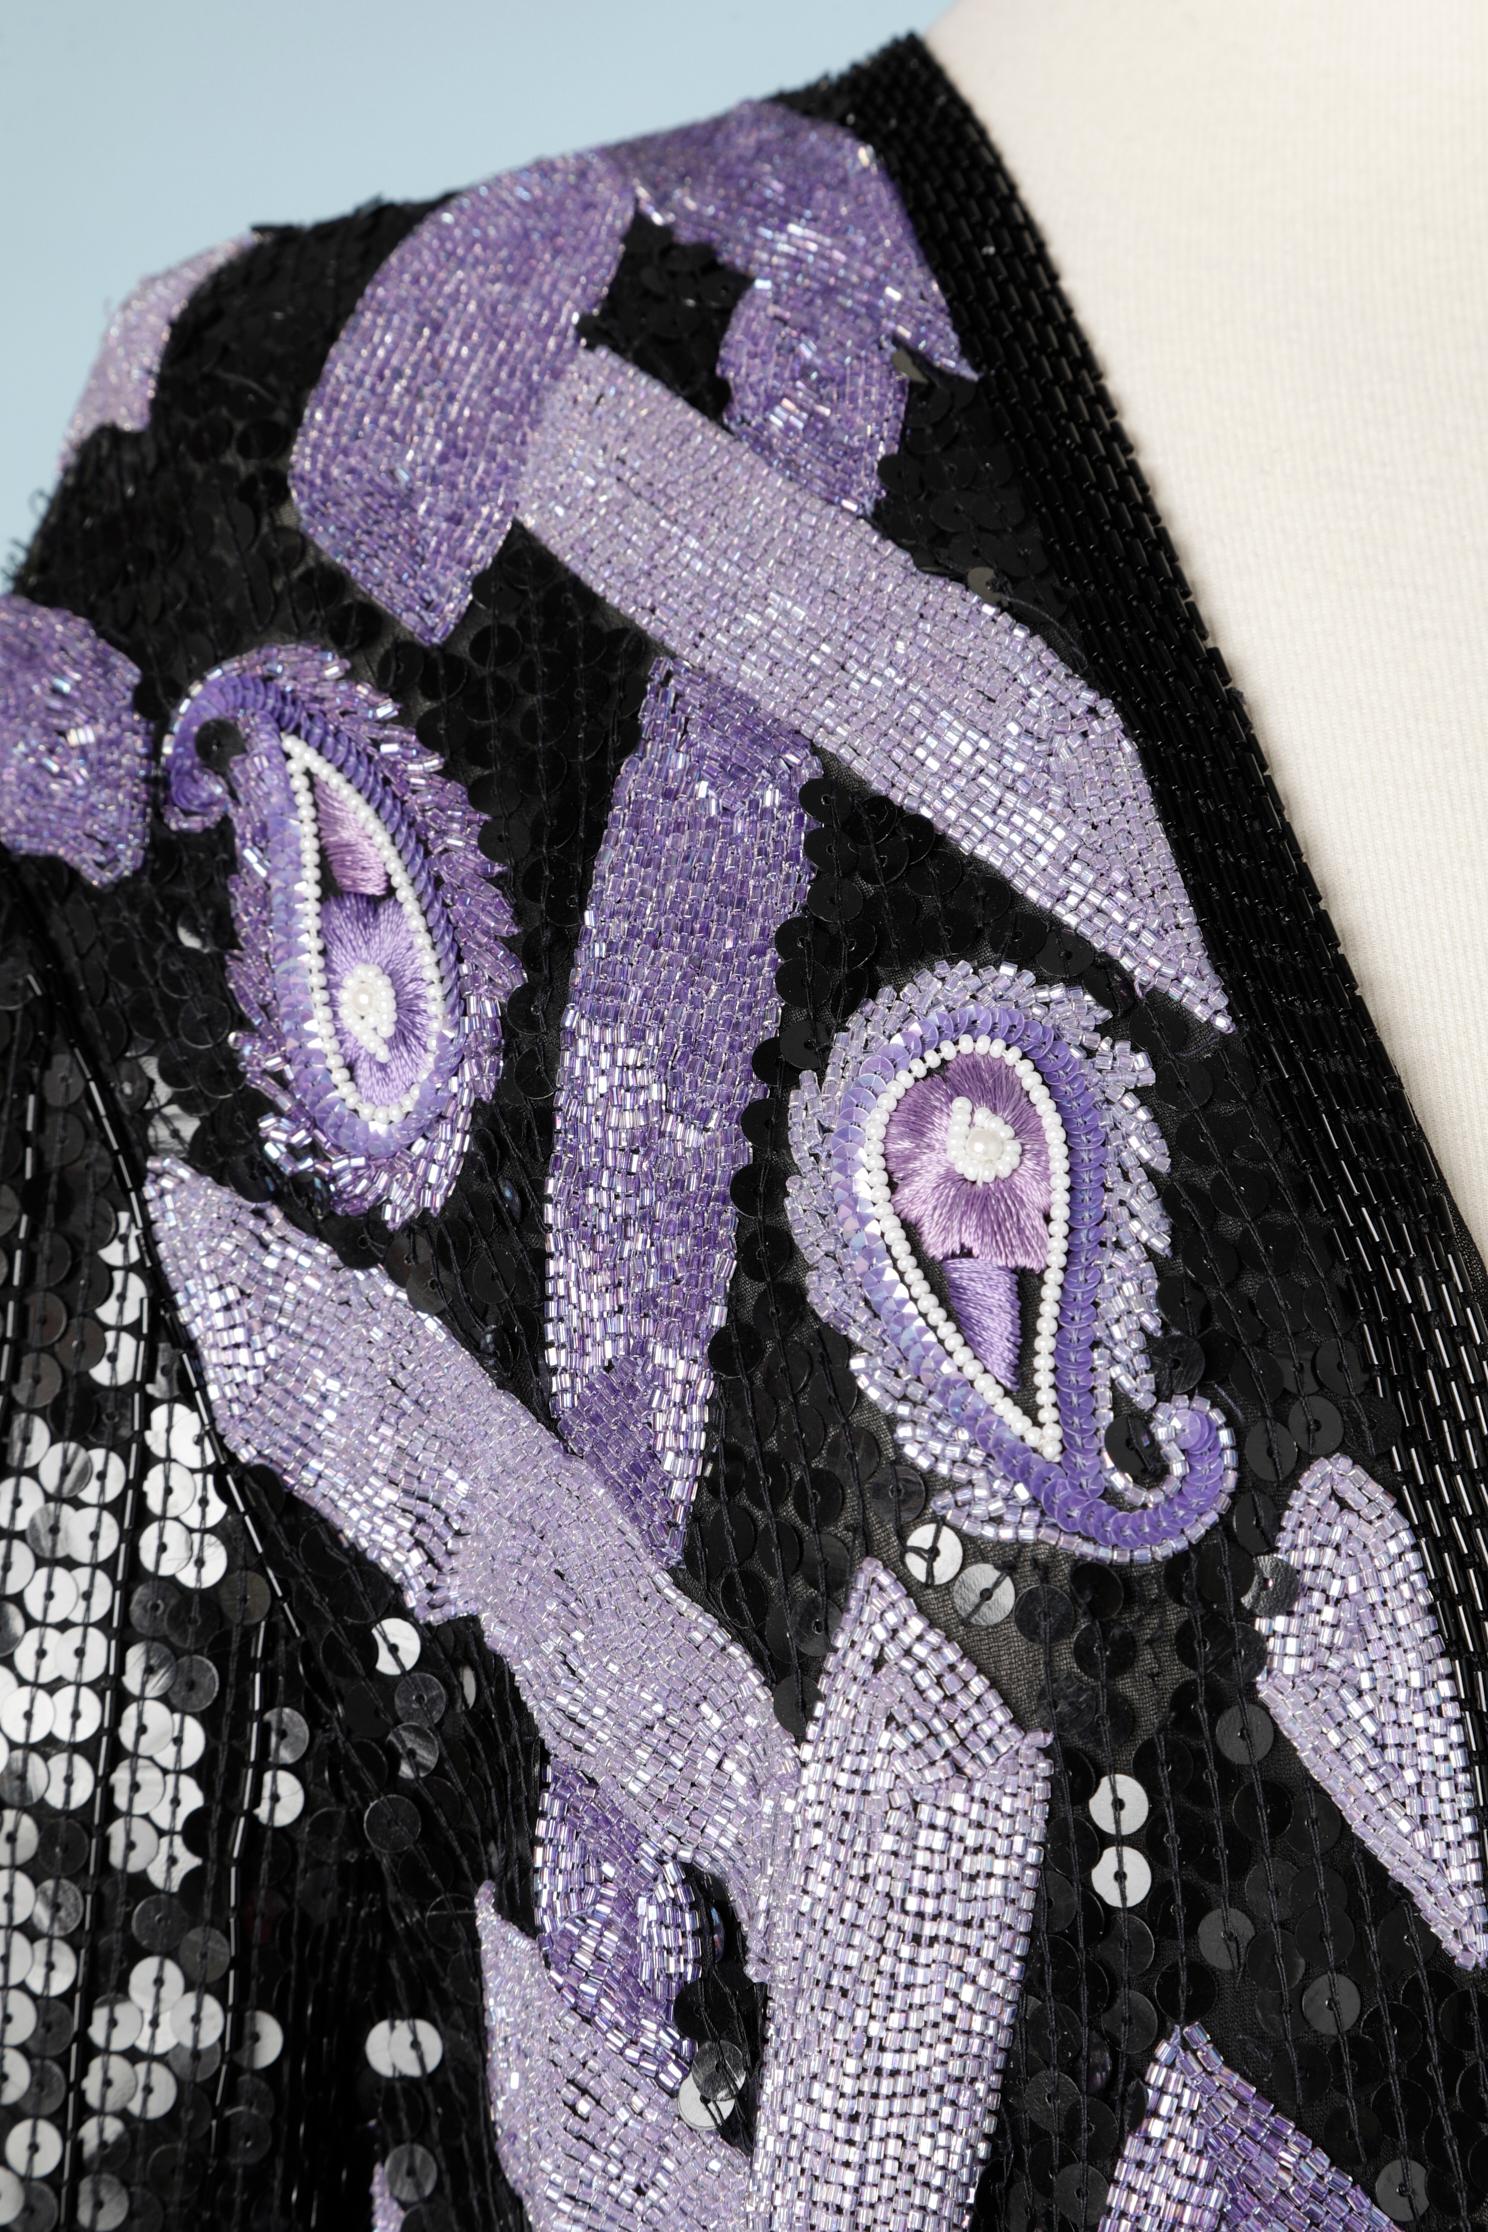 Black and purple full embroidered jacket with beads, threads and sequins on a black chiffon base and chiffon lining; 